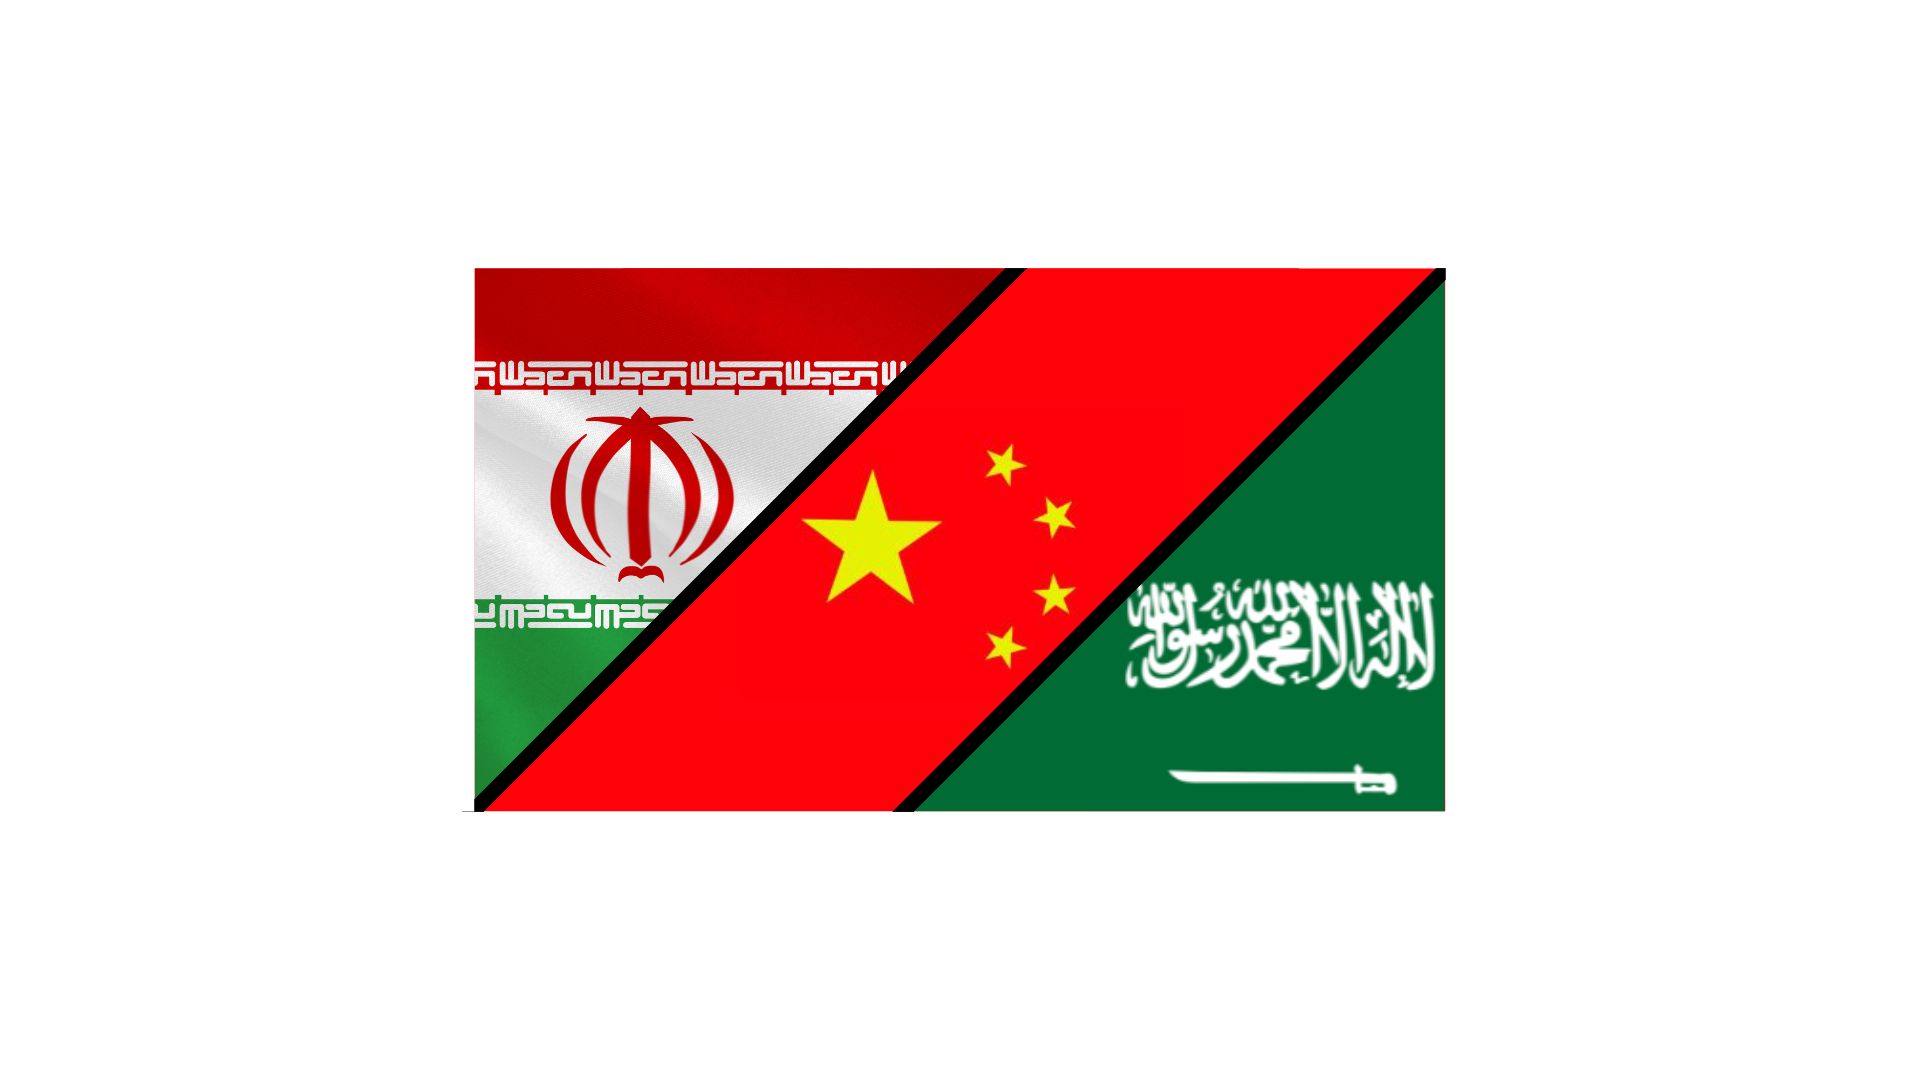 Three flags cut diagonally across the image, the Iranian flag in the top right corner, the Chinese flag through the middle, and the Saudi Arabian flag in the bottom left hand corner. Each flag is separated by a black bar. 